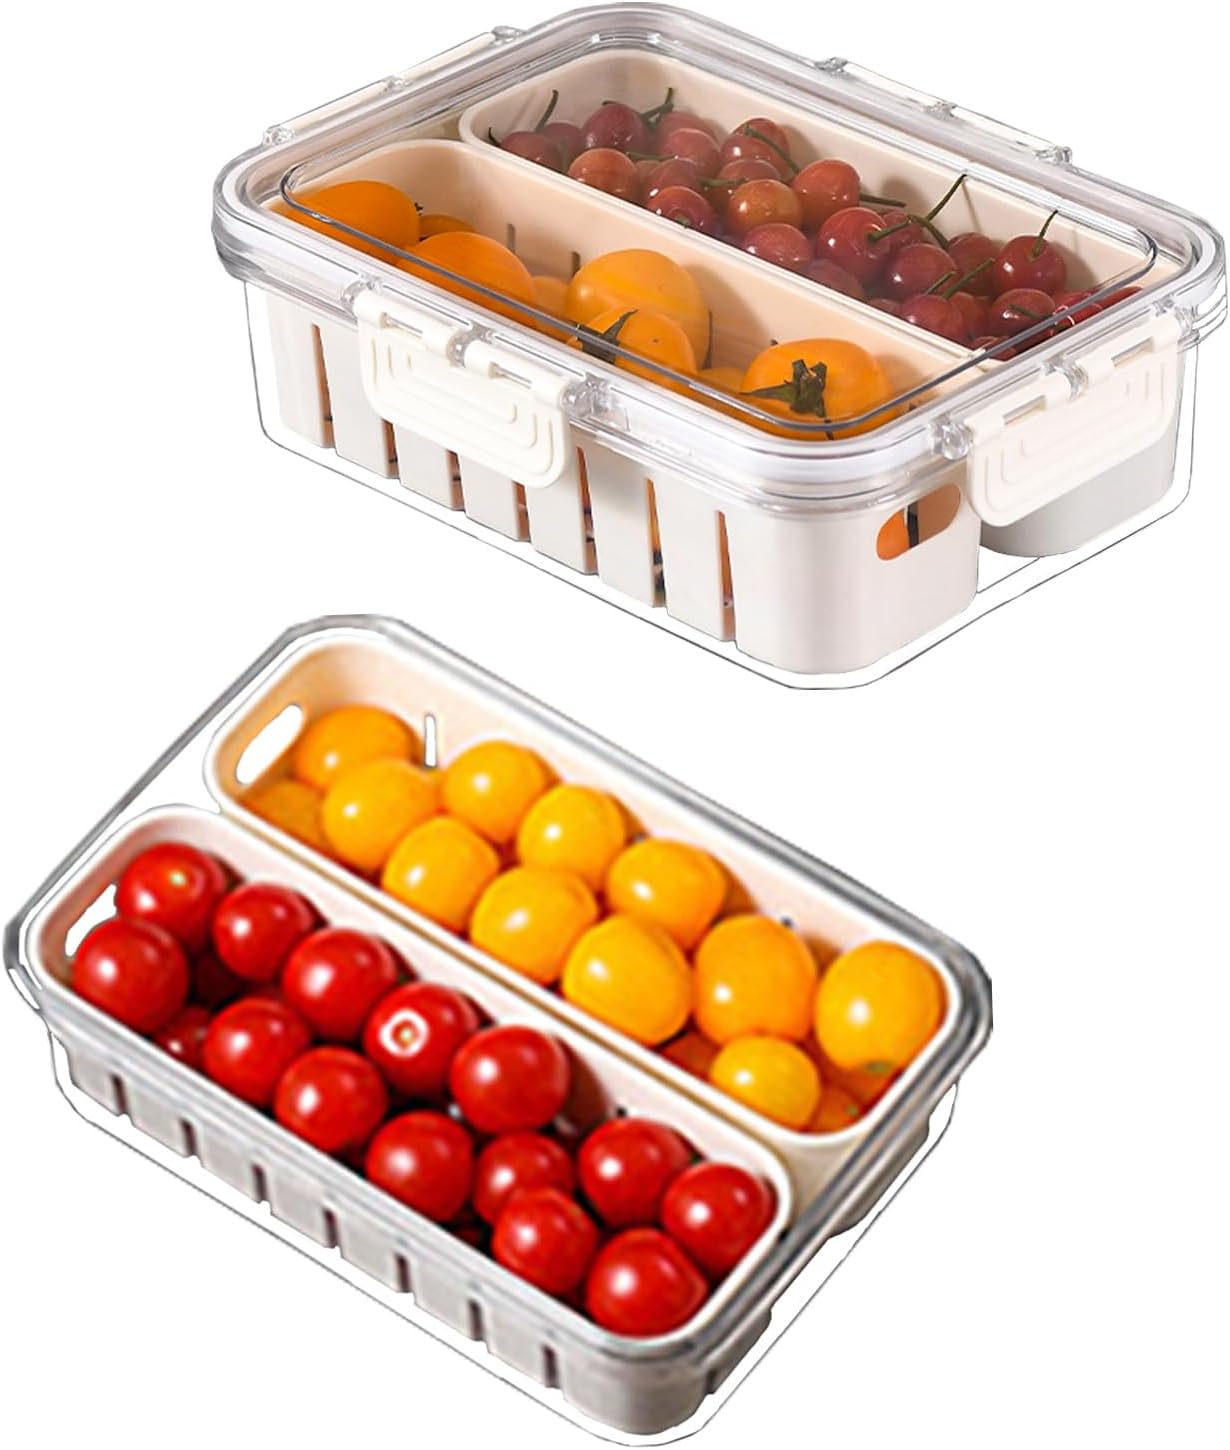 Food Produce Saver Containers for Refrigerator, Reusable Fresh Vegetables Storage Containers with 2 Detachable Boxes for Vegetables, Fruit,Meat and Salad